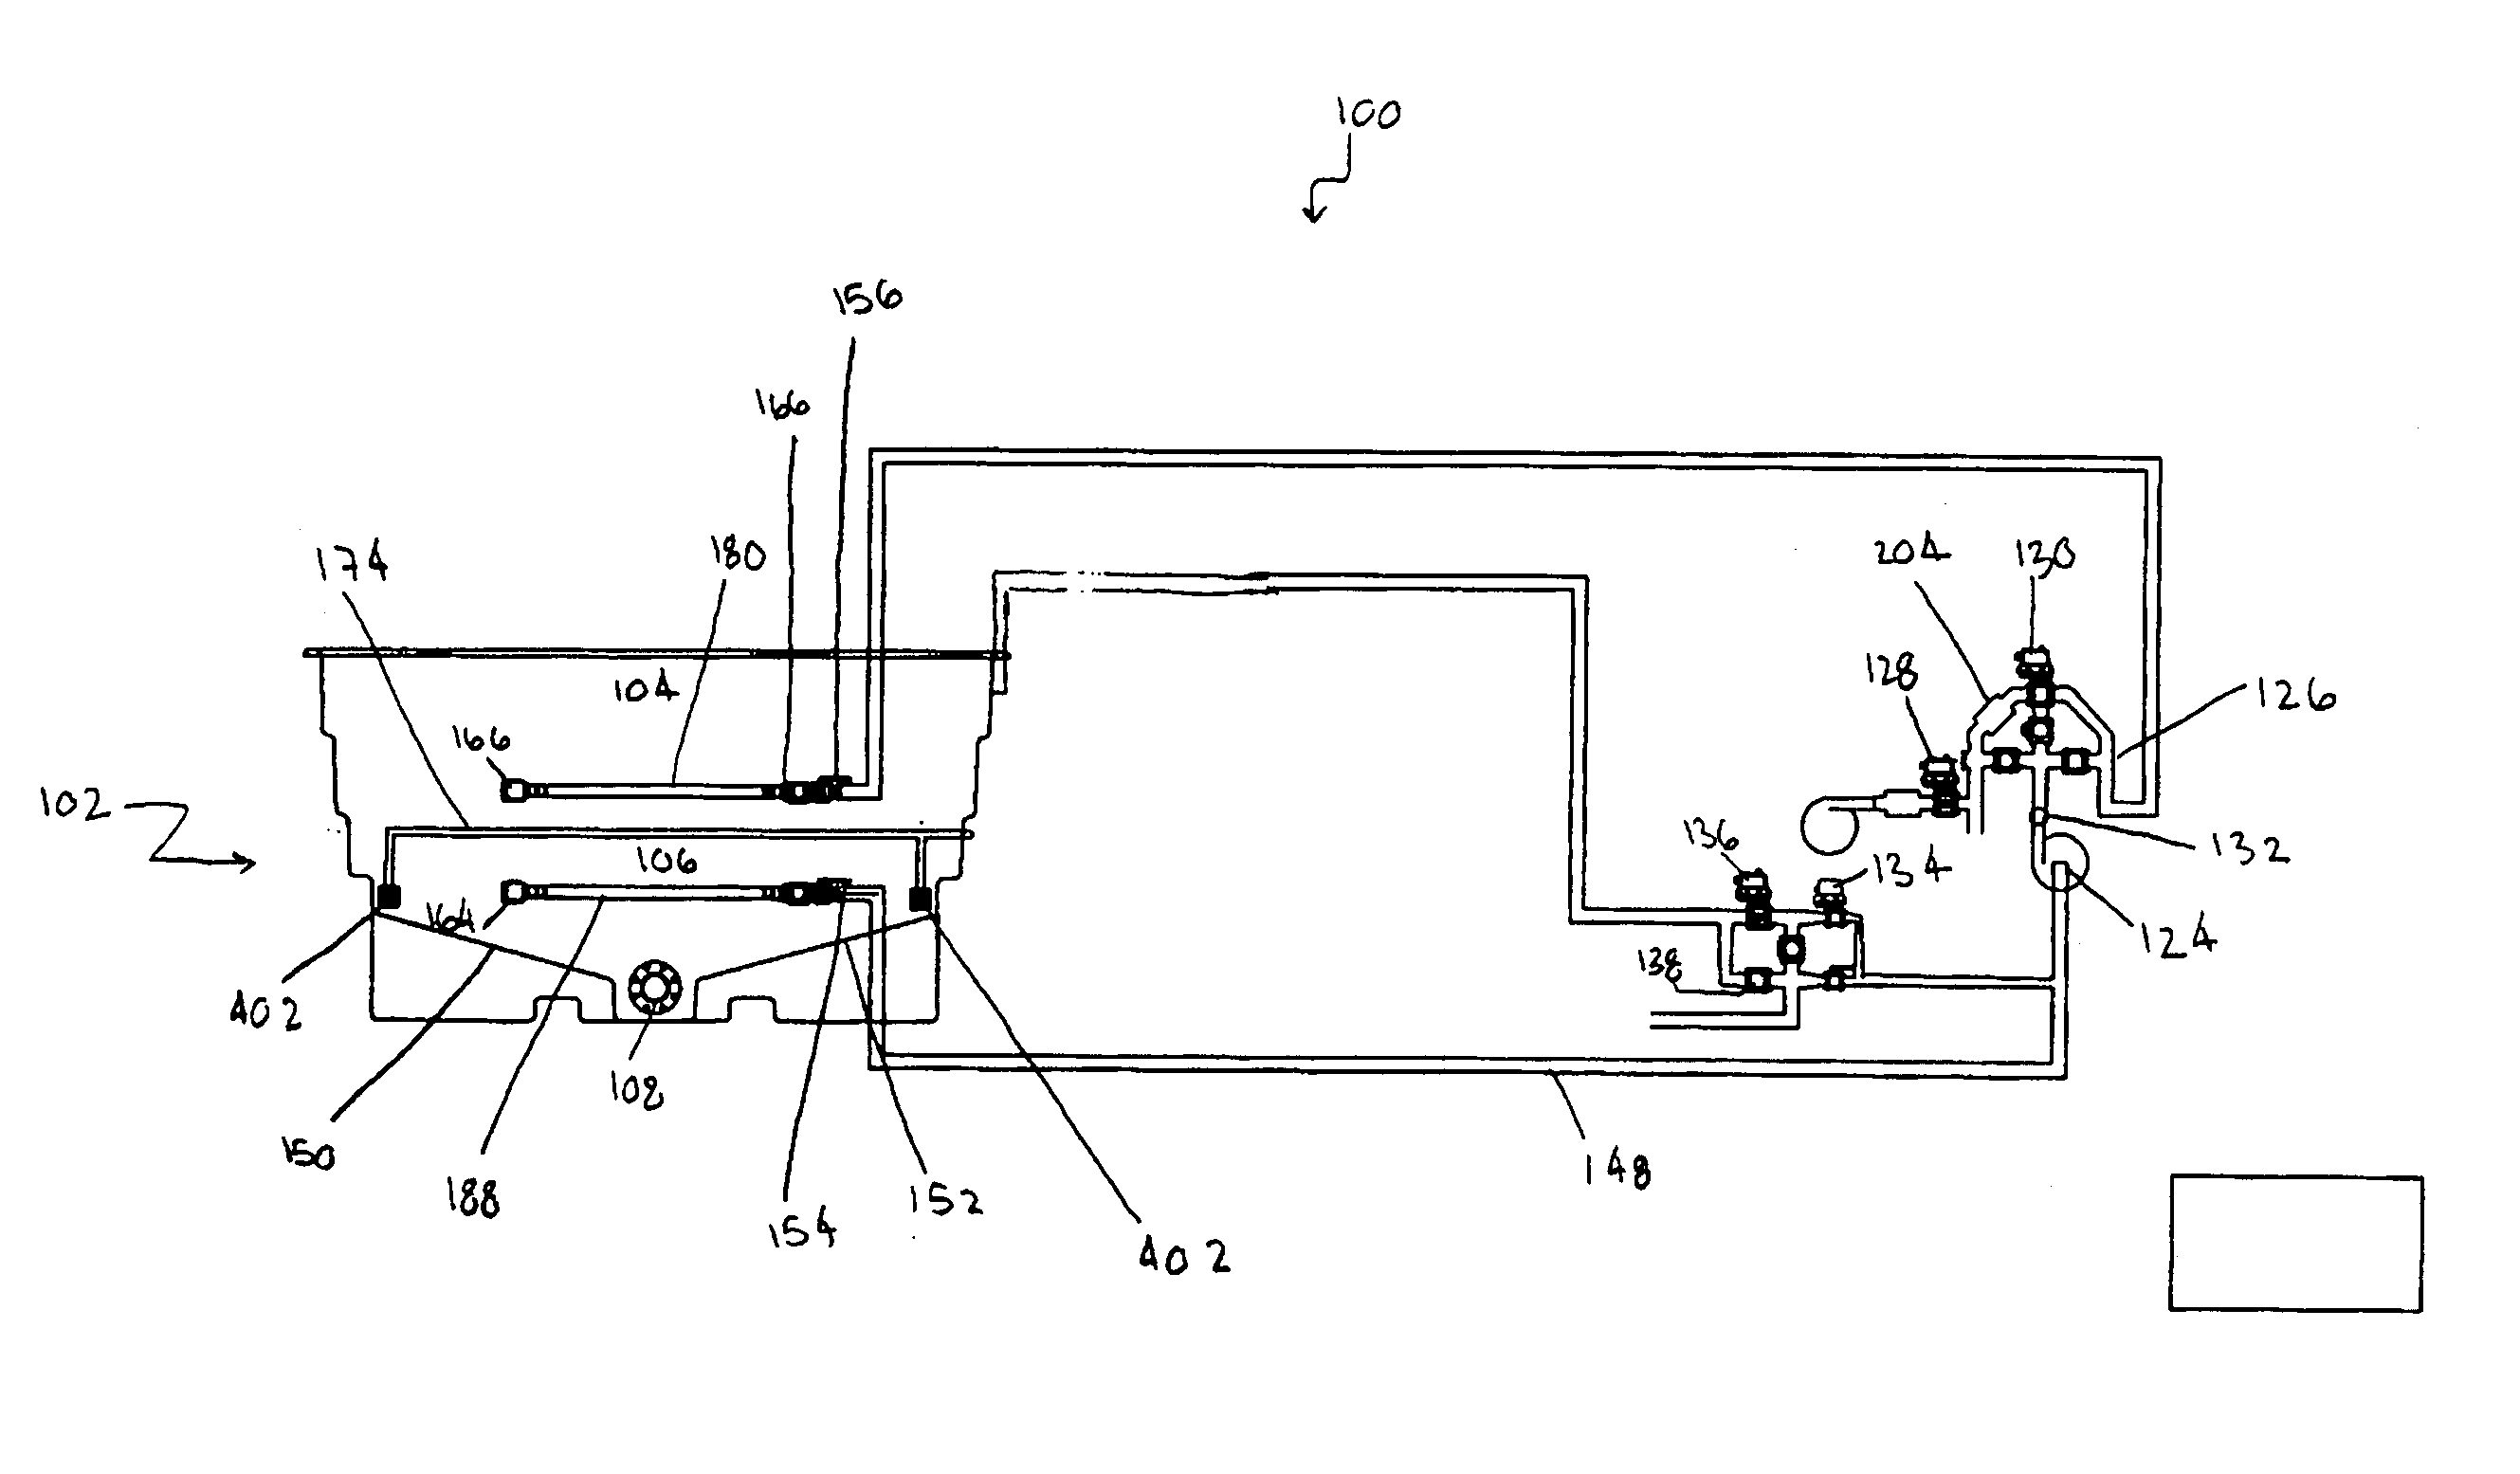 Automated solution maker apparatus